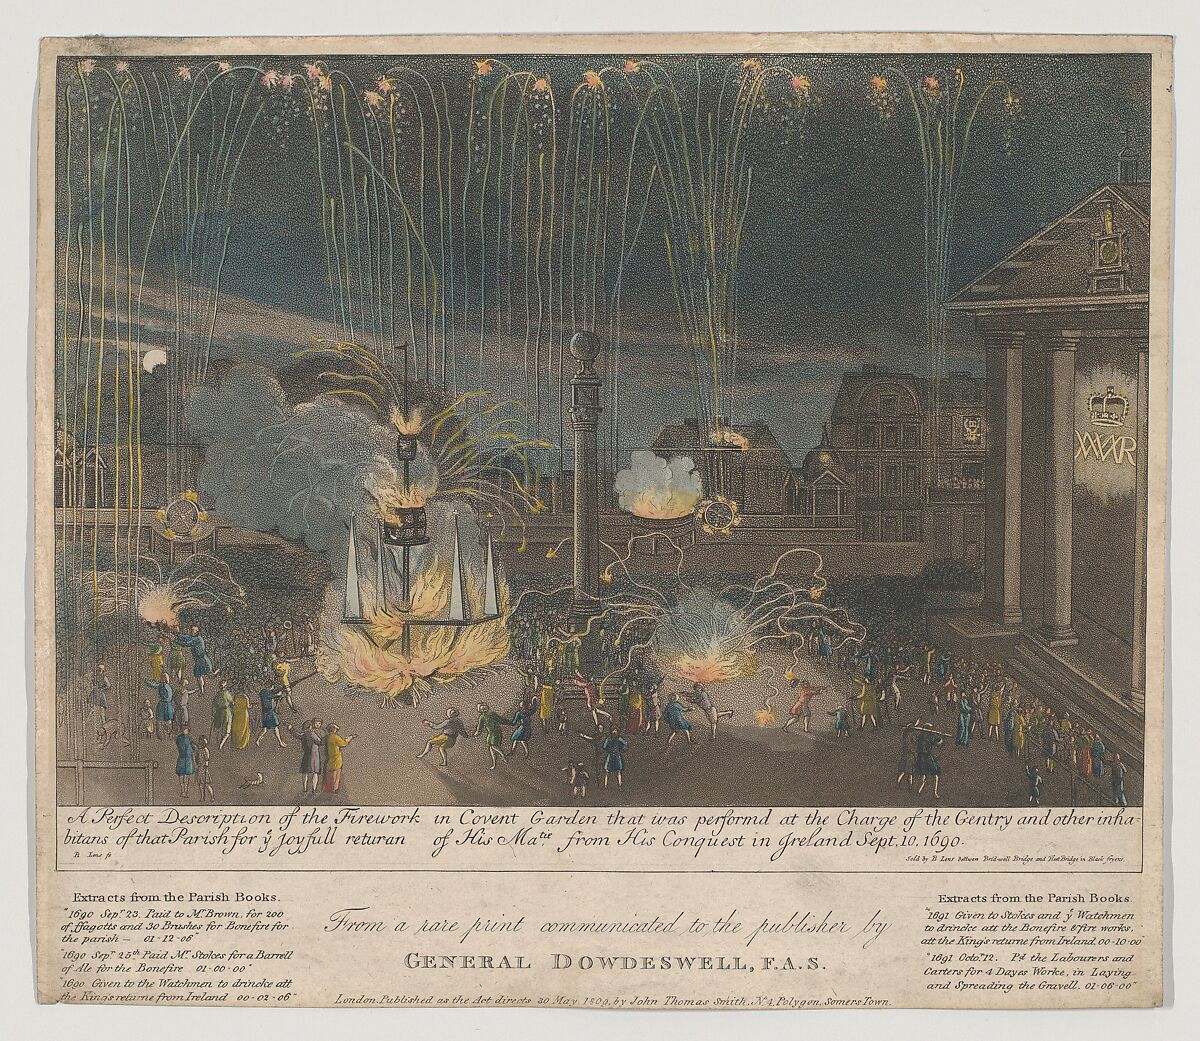 A Perfect Description of the Firework in Covent Garden that was perform'd at the Charge of the Gentry and other inhabitants of that Parish for ye joyfull returan [sic] of His Ma-tiw from His Conquest in Ireland, Sept. 10, 1690, Bernard Lens II (British, 1659/60–1725), Etching and aquatint, hand colored (likely added later) 